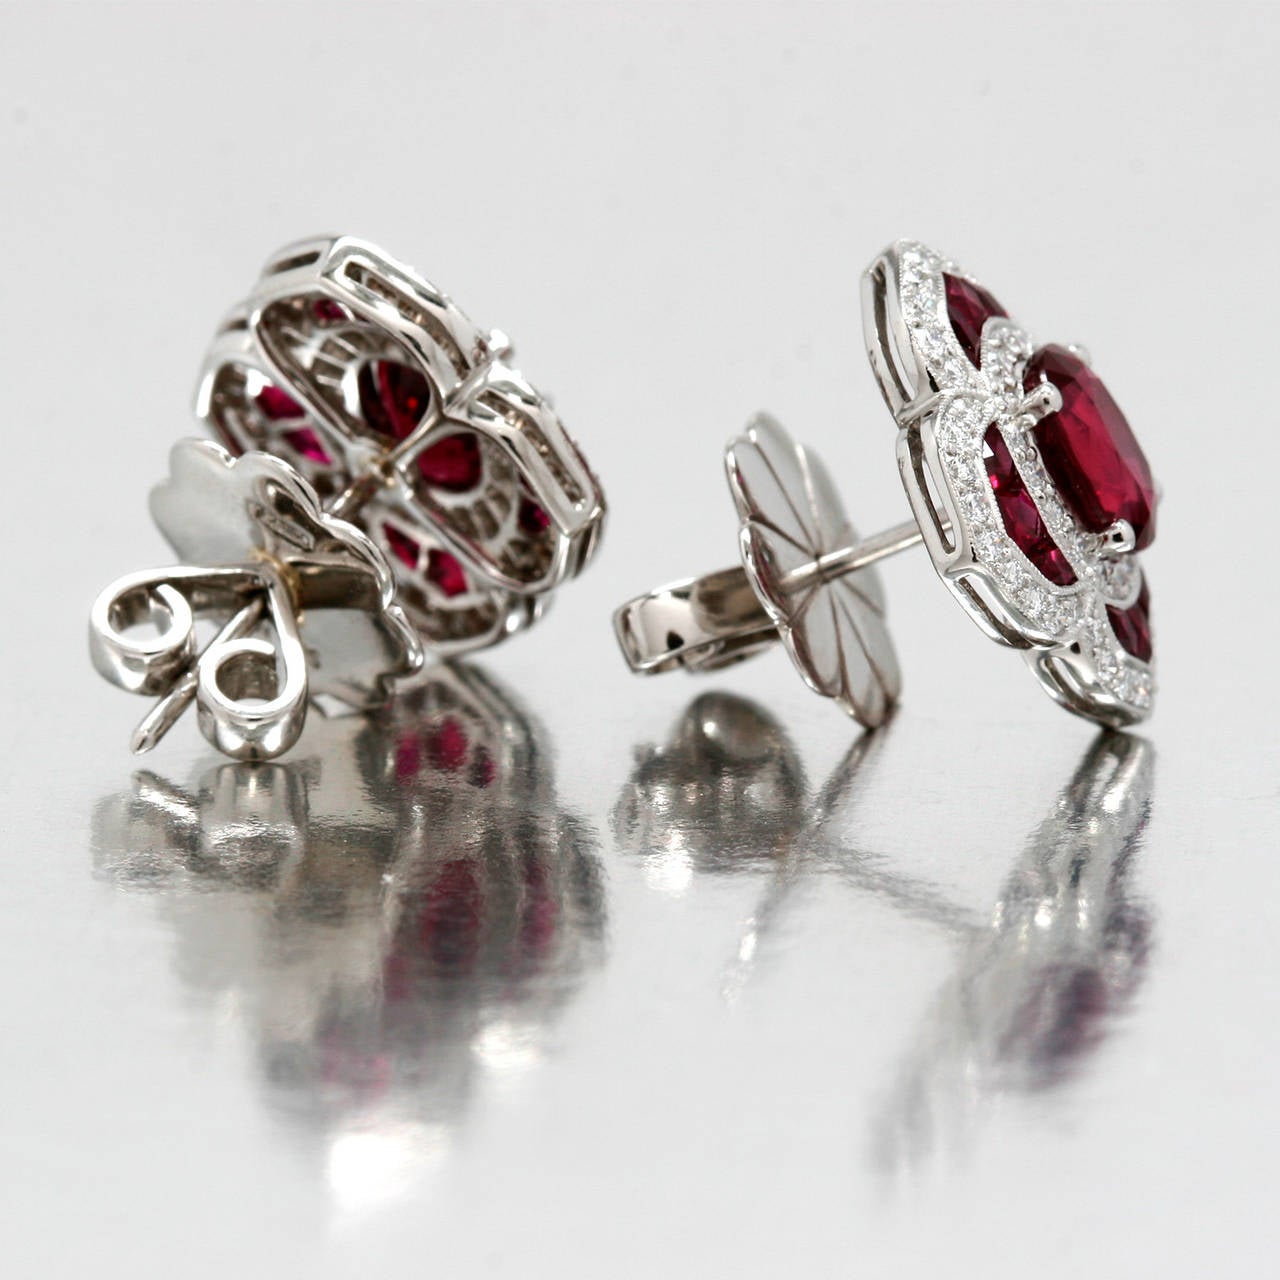 Spectacular Platinum Burma Ruby(2Oval Rubies=1.90ctw) and Diamond(108d=2.22ctw) Earrings, adorned with Smaller Rubies(24R=1.08ctw) with a Stud Post back. Weighing 9 grams with Platinum Backs.